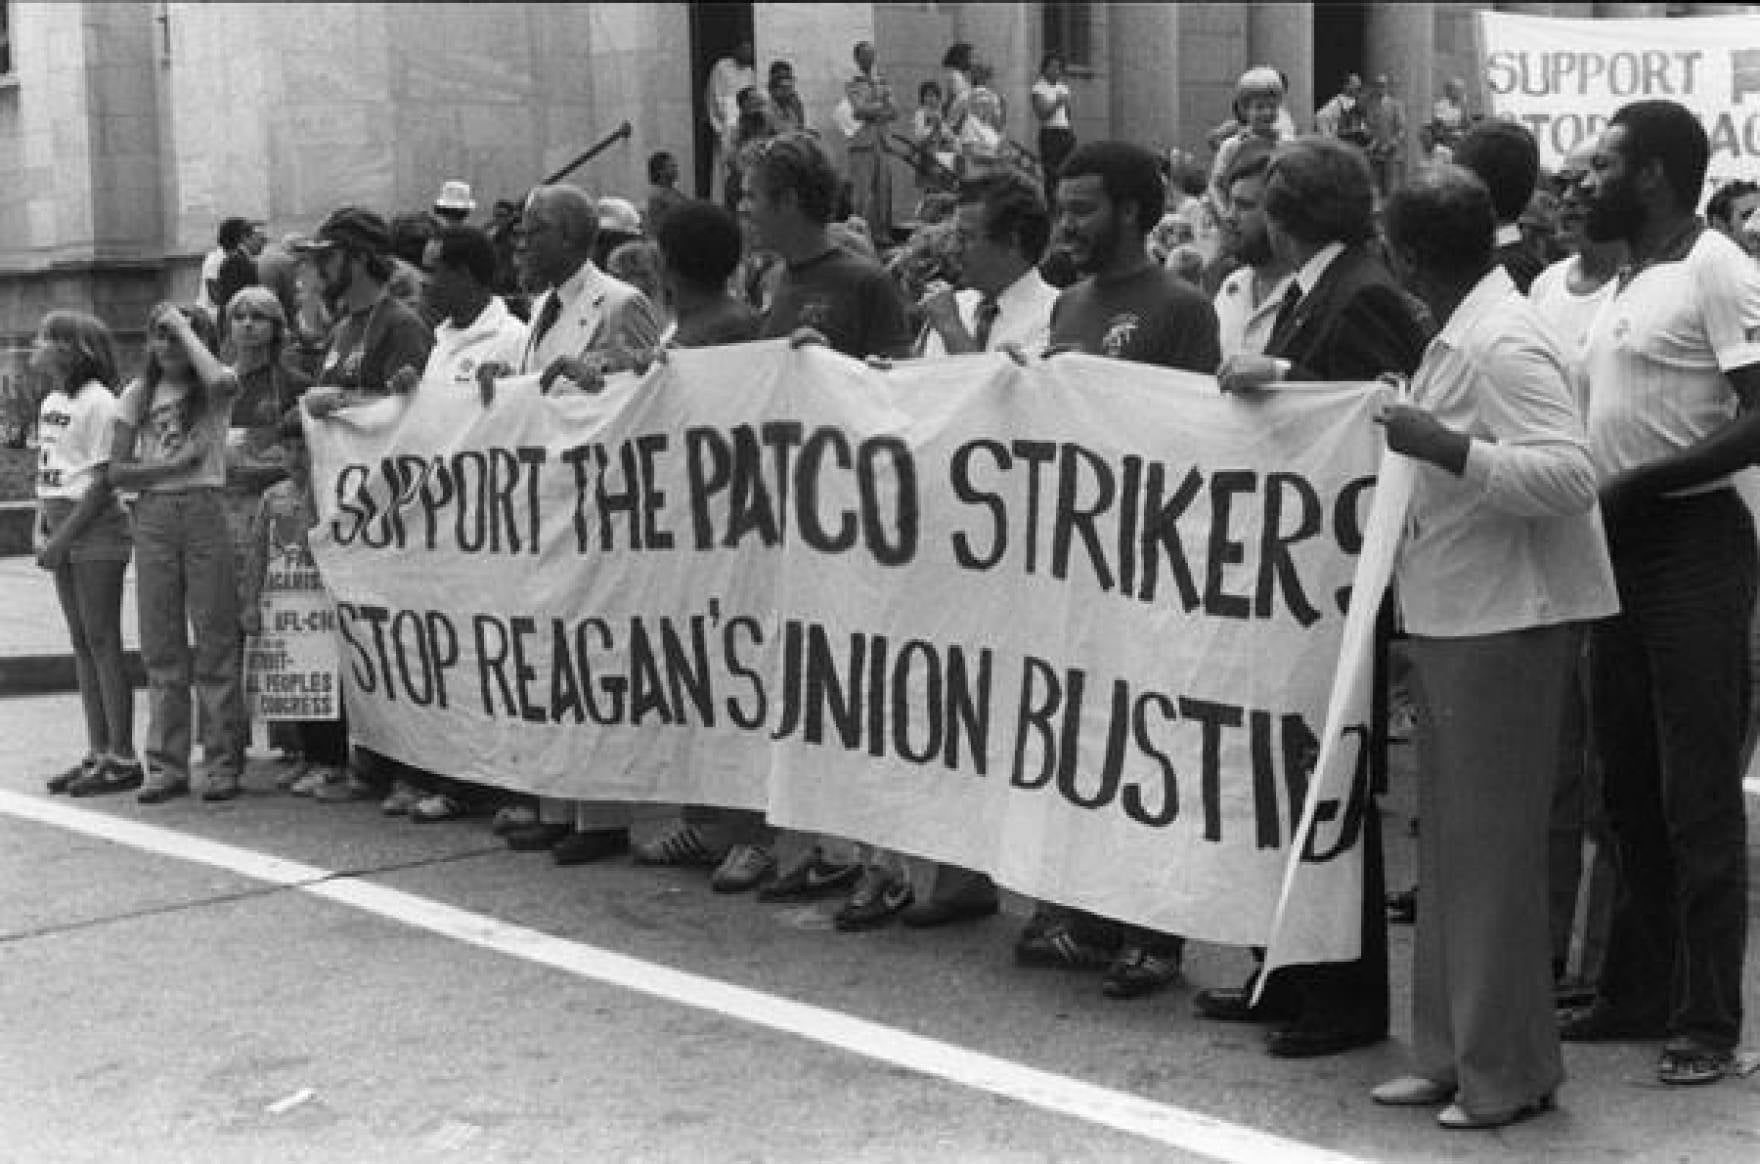 Old-looking black and white photograph of protesters holding a banner that says 